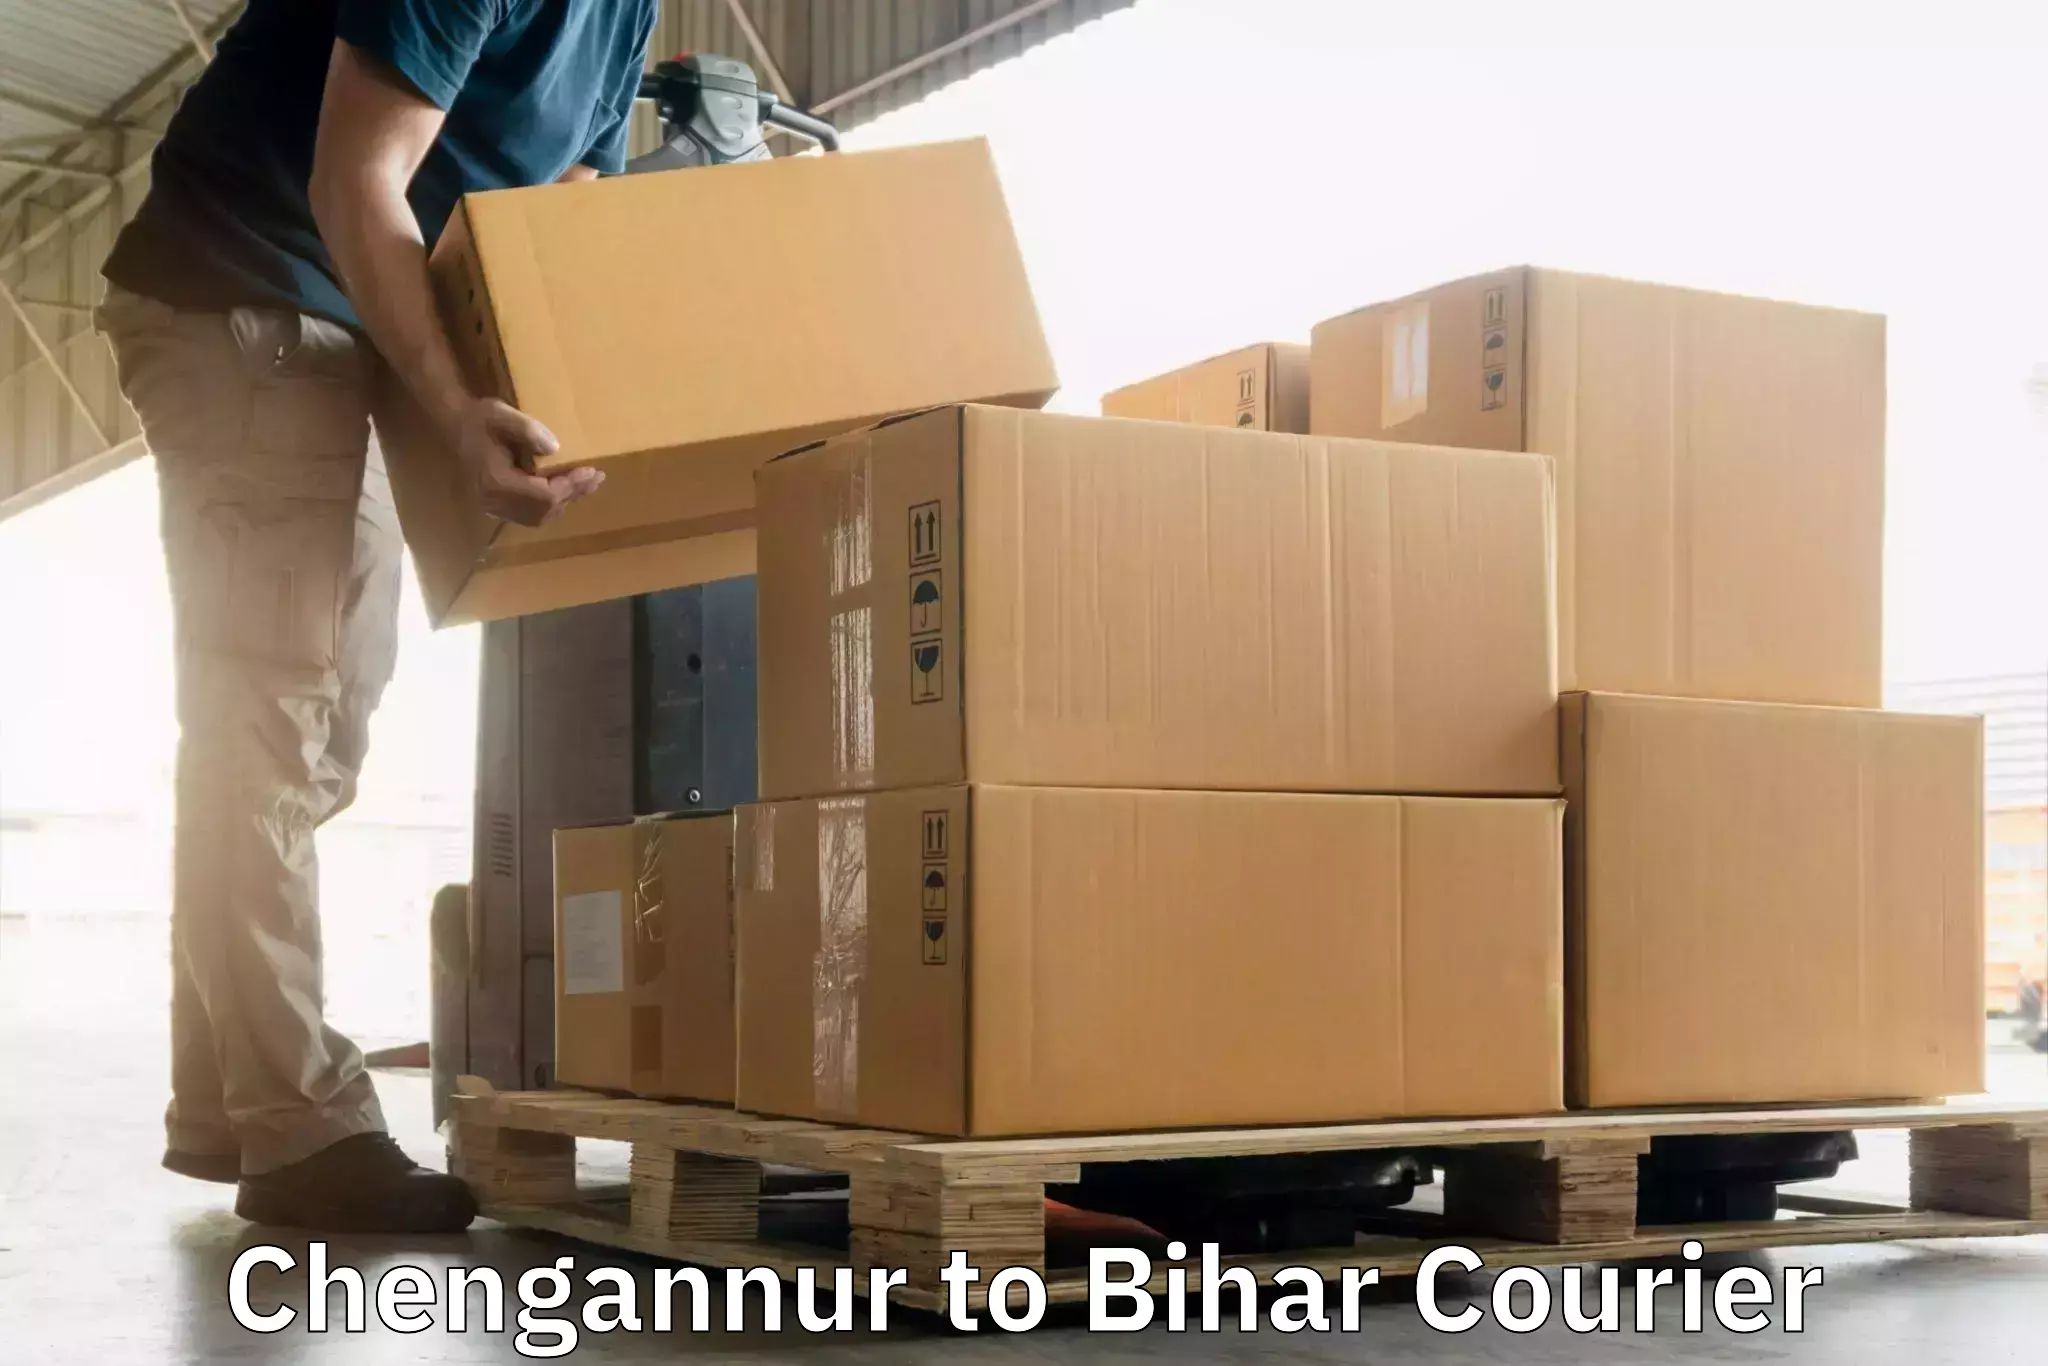 High-speed parcel service Chengannur to Baniapur